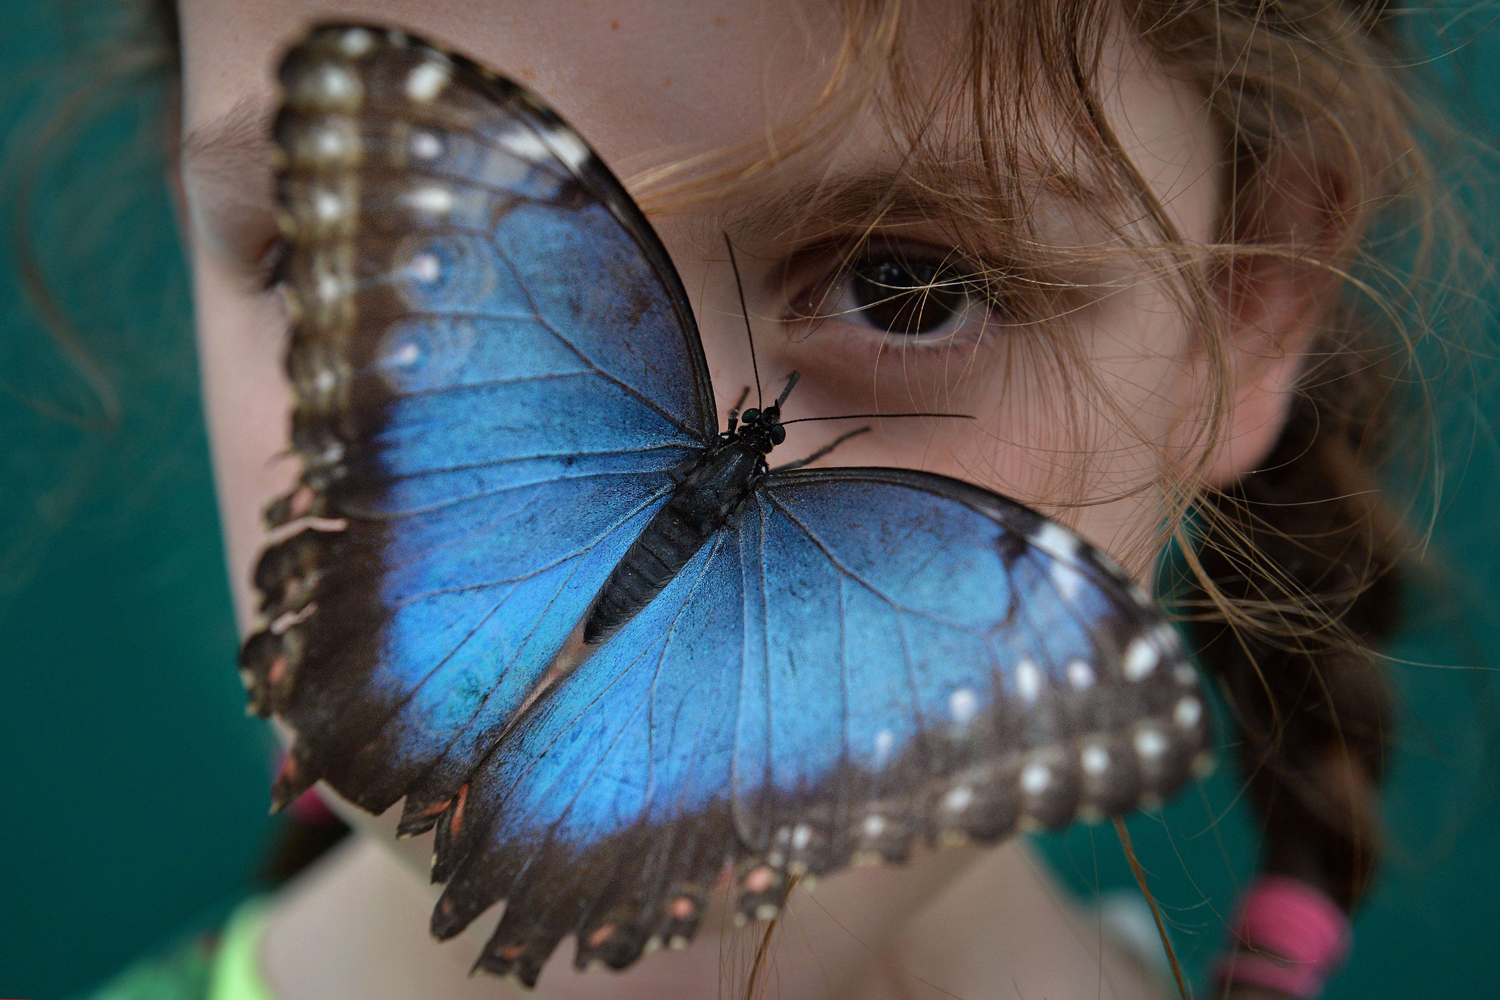 A Morpho peleides butterfly sits on the nose of a child during a photocall in the Natural History Museum's 'Sensational Butterflies' outdoor butterfly house in London on March 31, 2014.